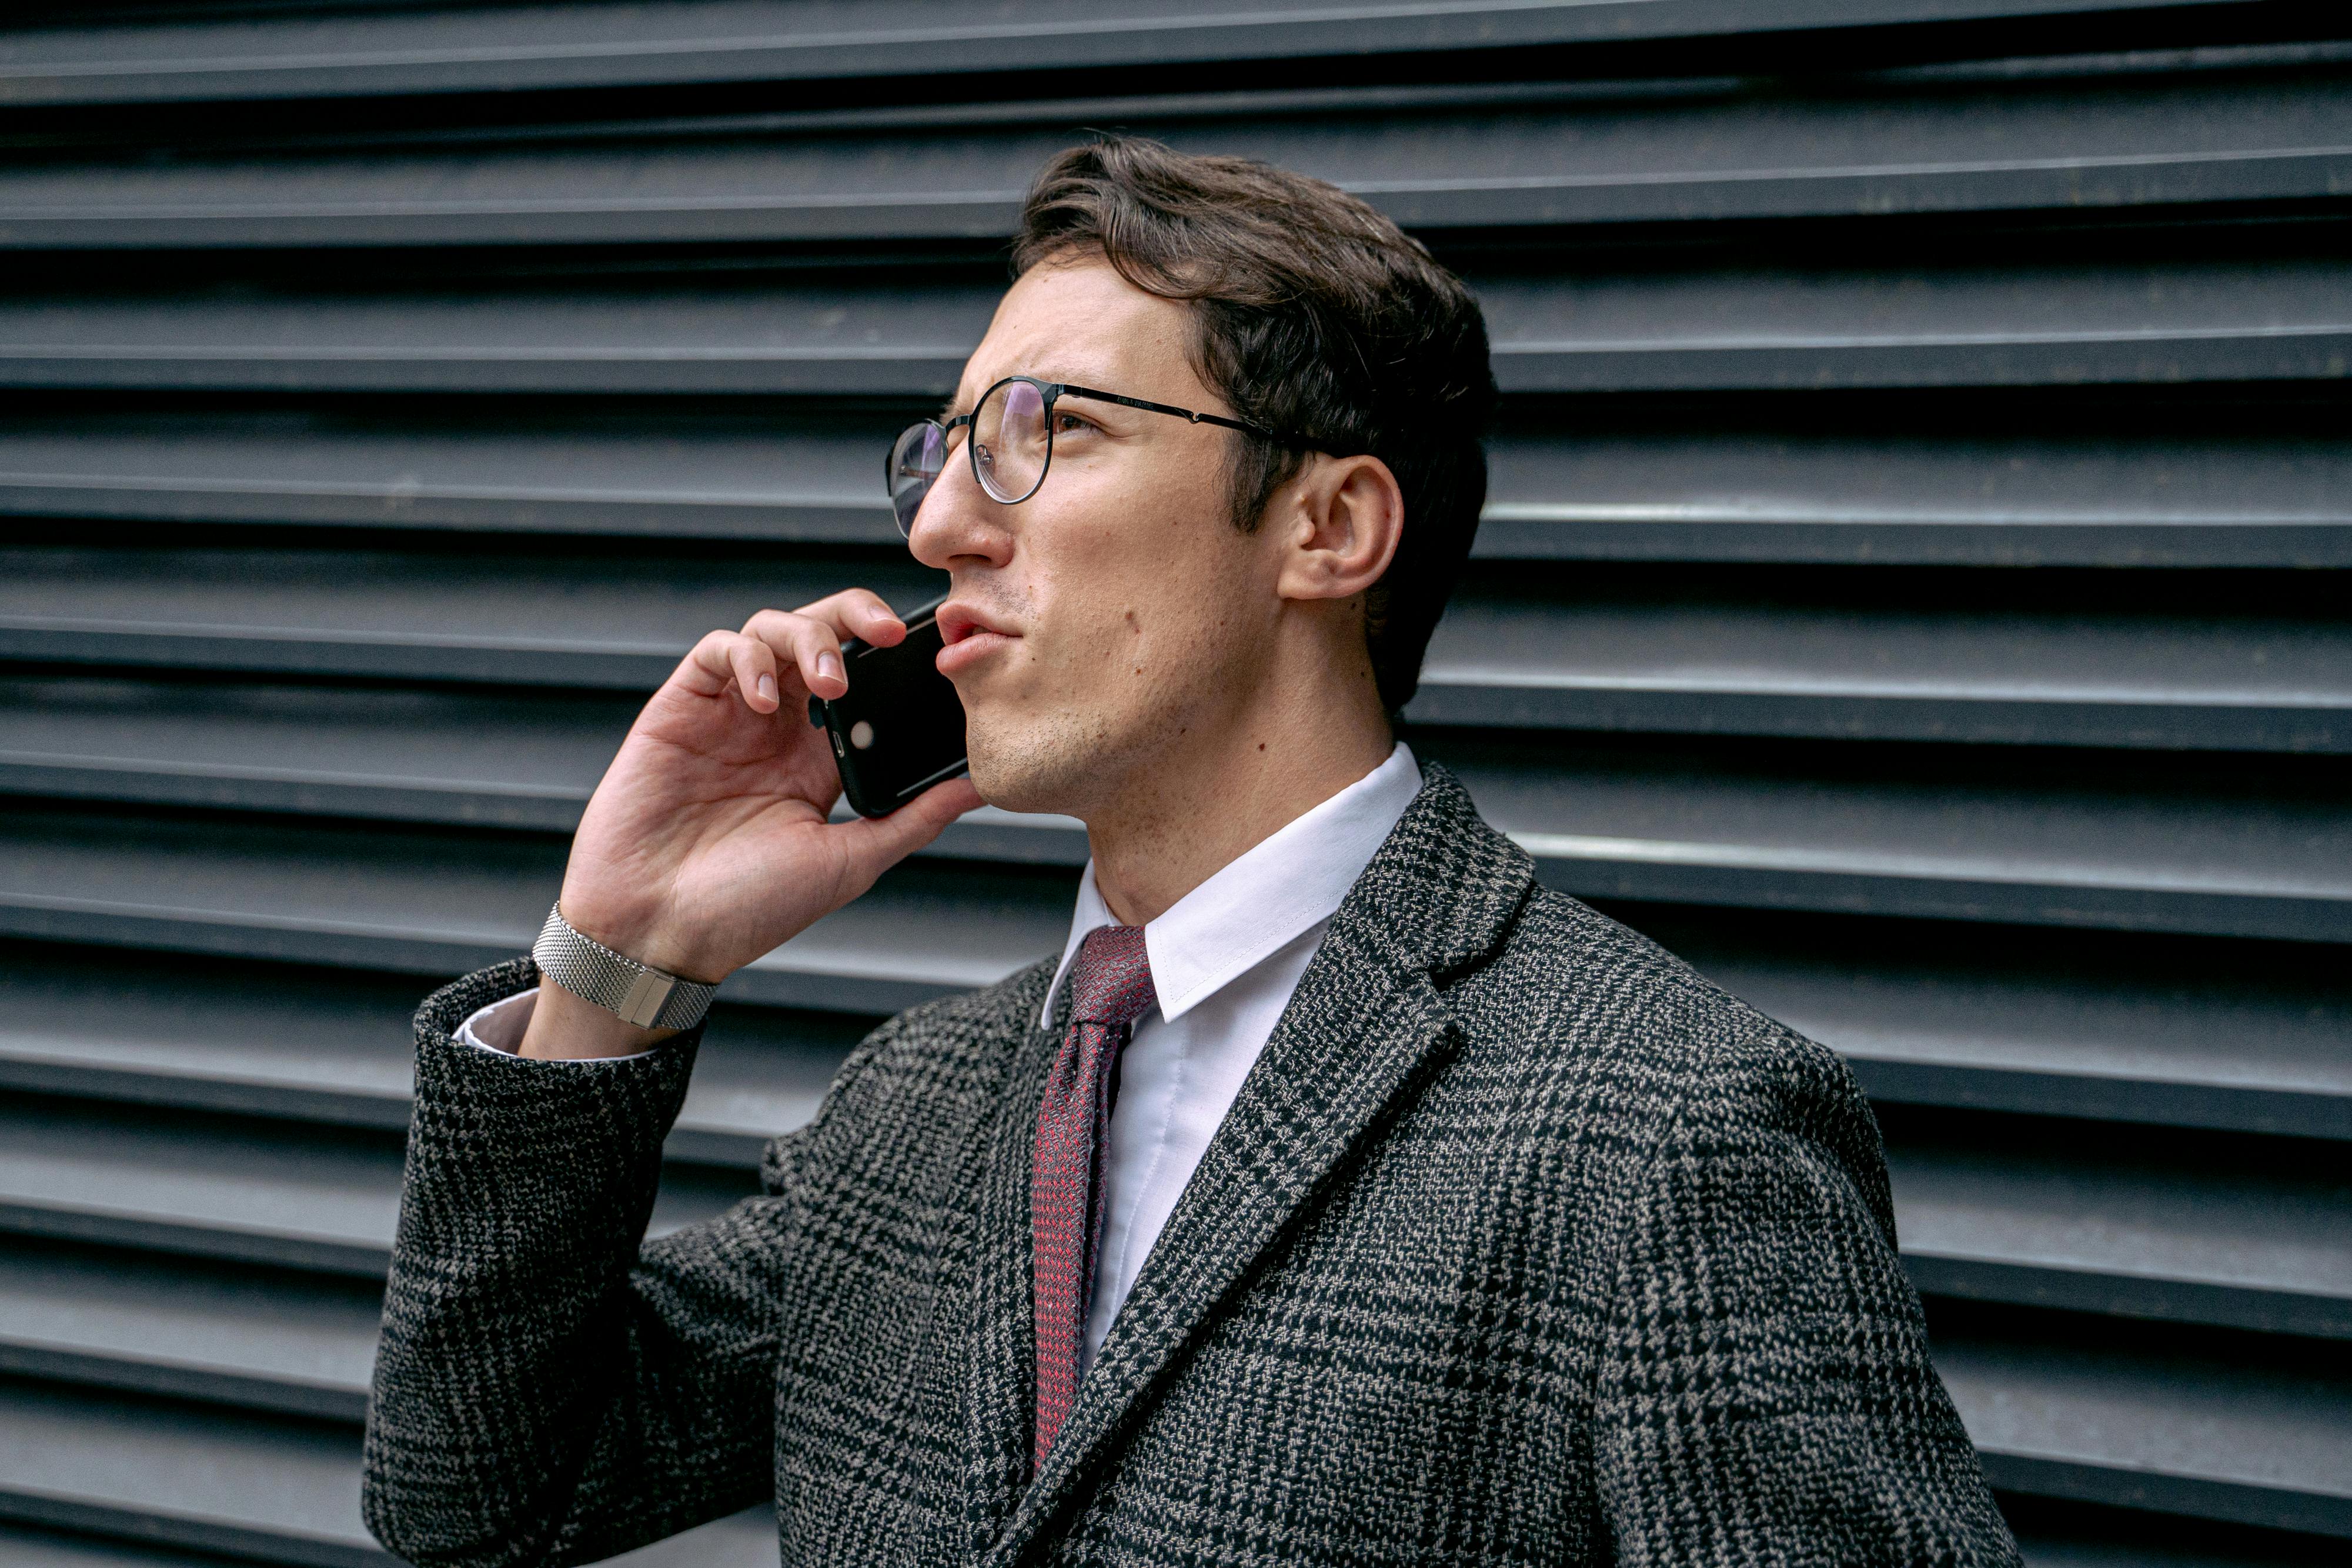 A man in a suit talking on a phone | Source: Pexels